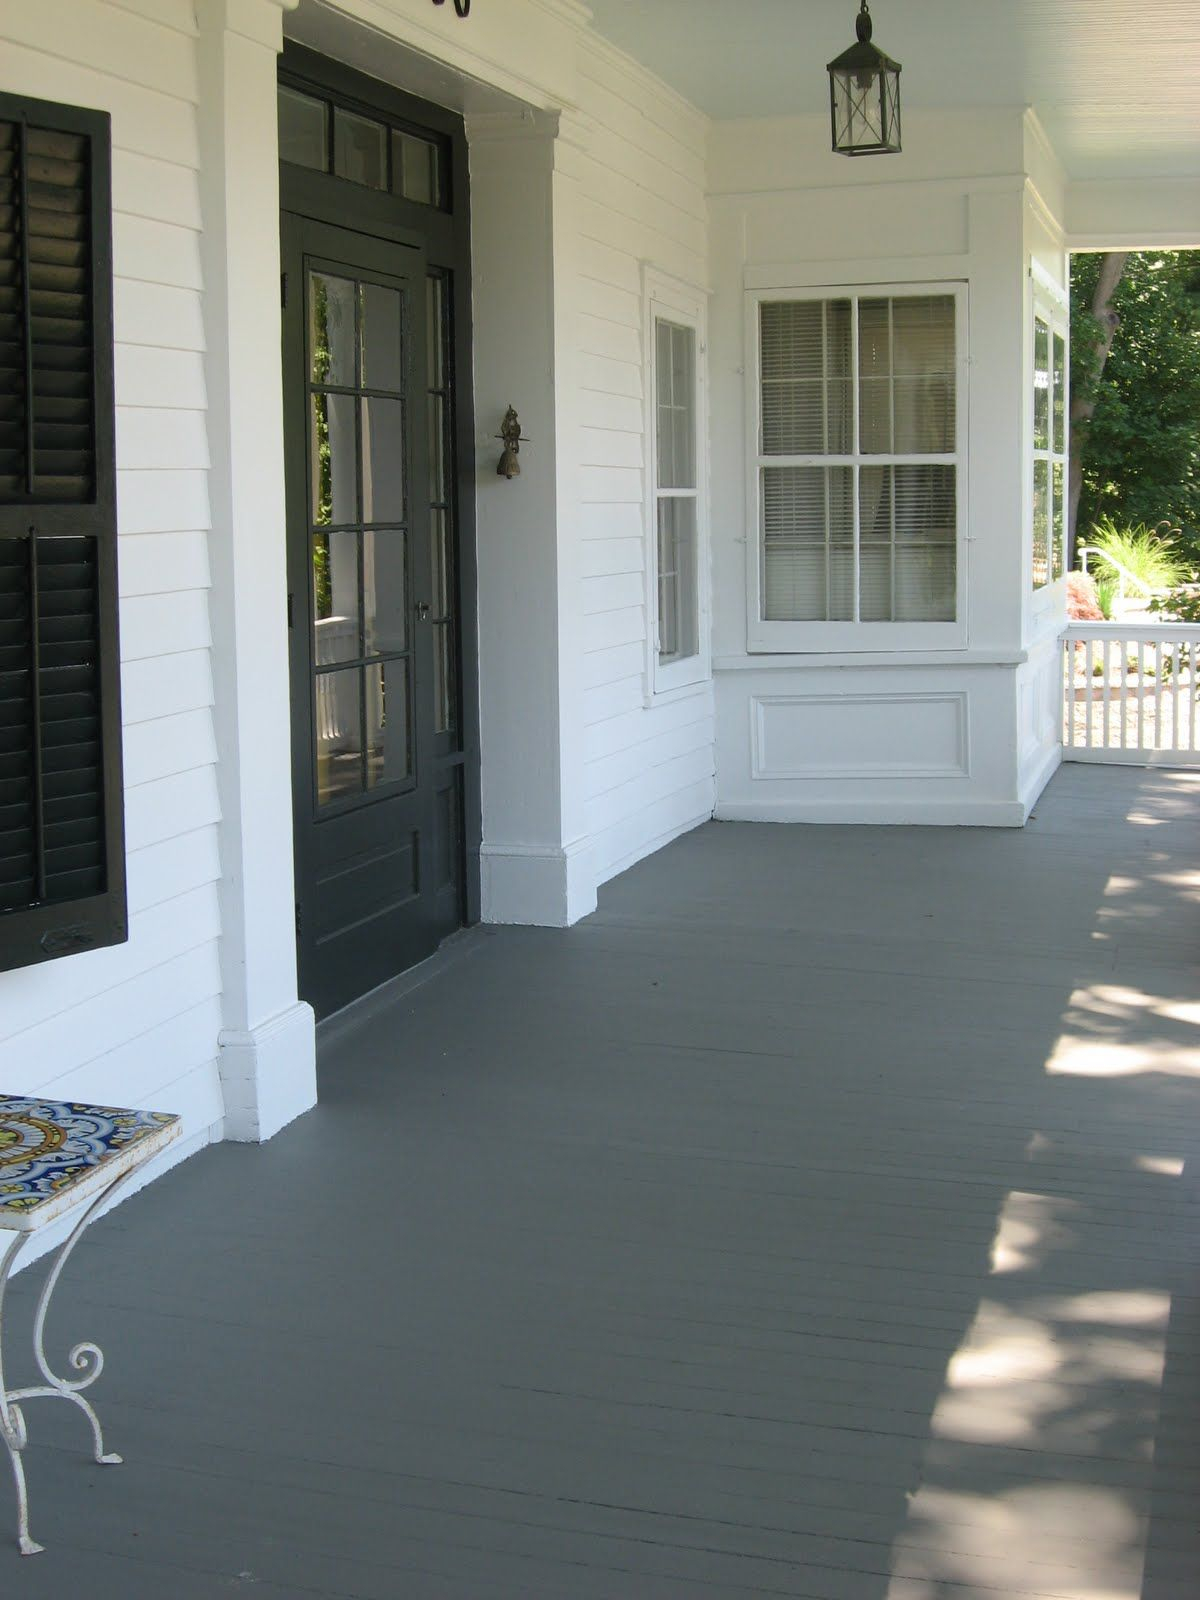 Pictures Of Decks Painted Gray That Old House Fading Flowers And with size 1200 X 1600